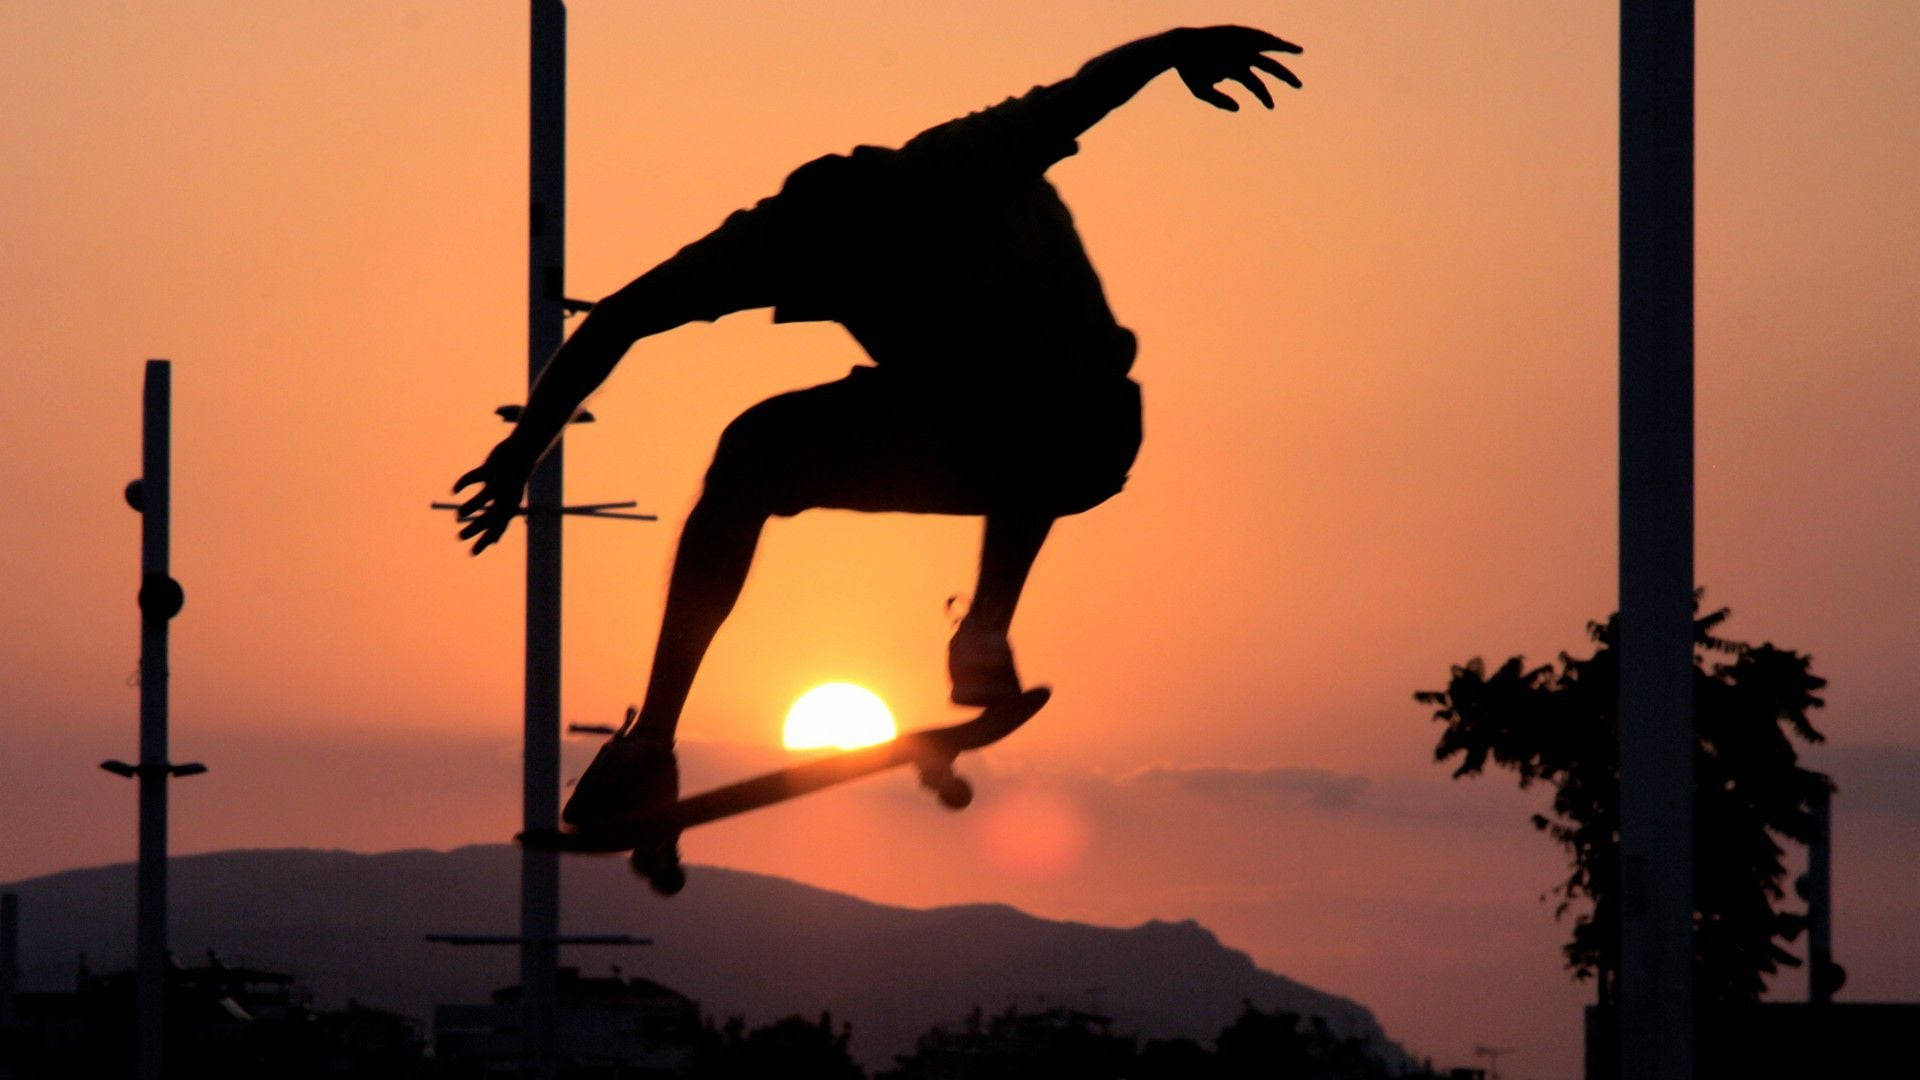 Aesthetic Skater Boy With Sunset Background